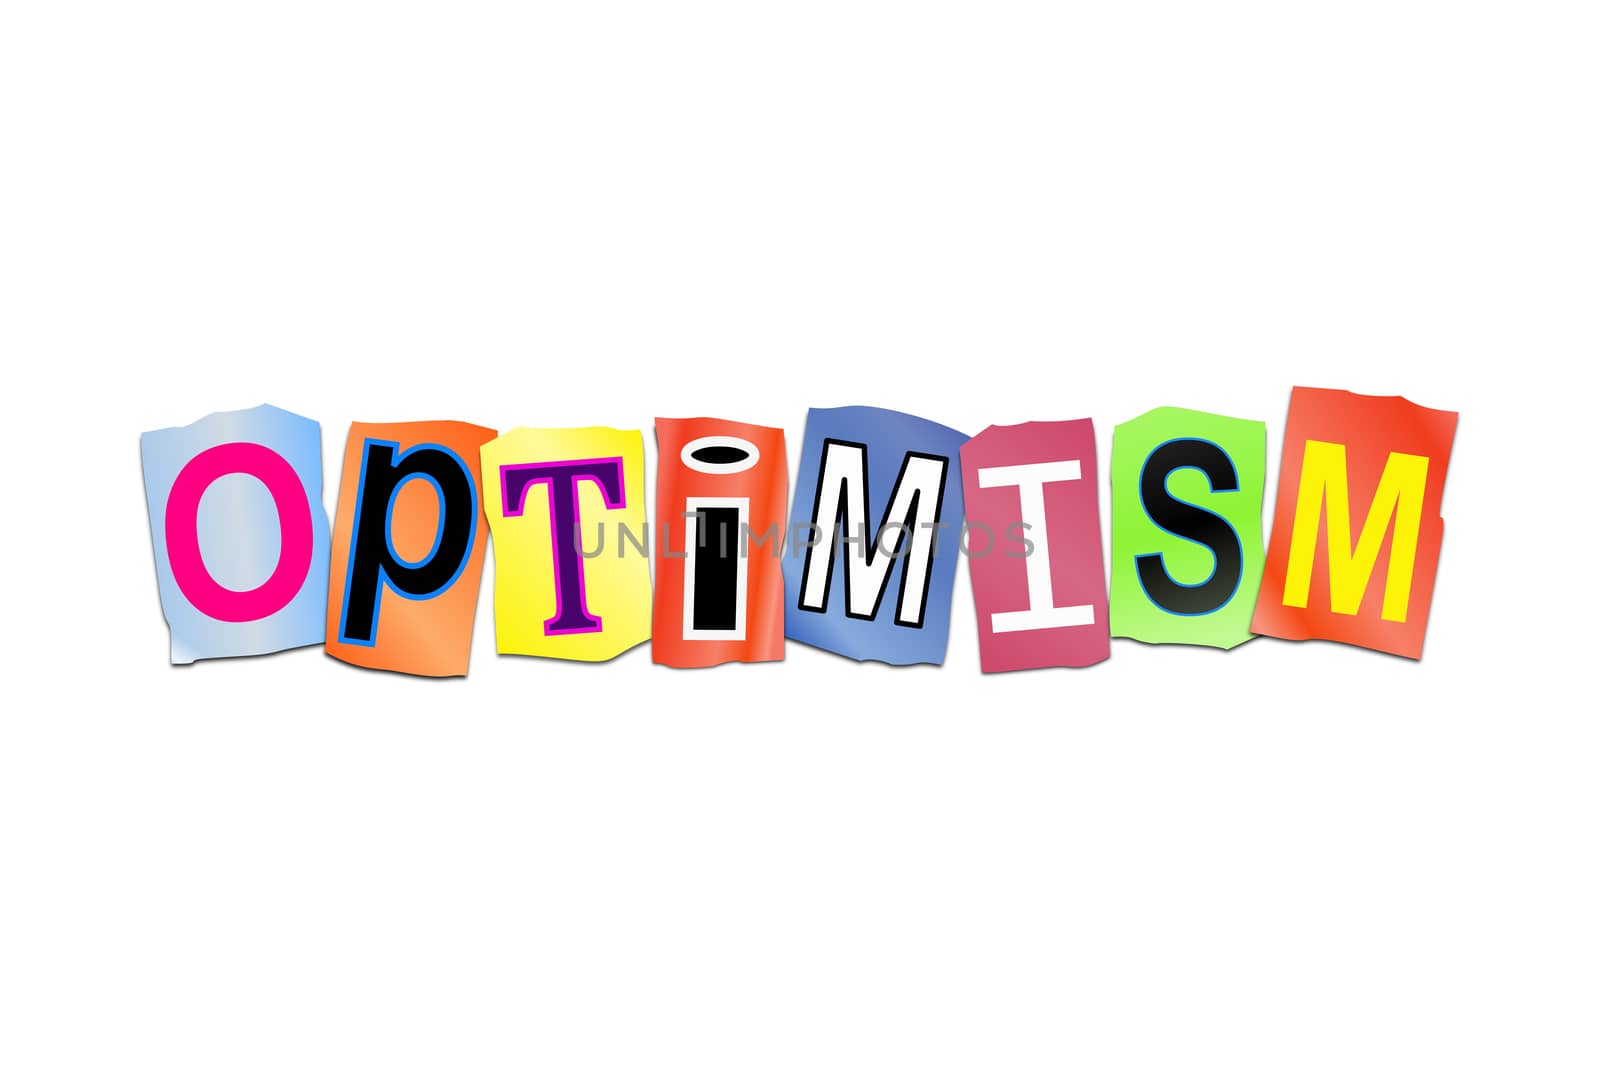 Illustration depicting a set of cut out printed letters arranged to form the word optimism.